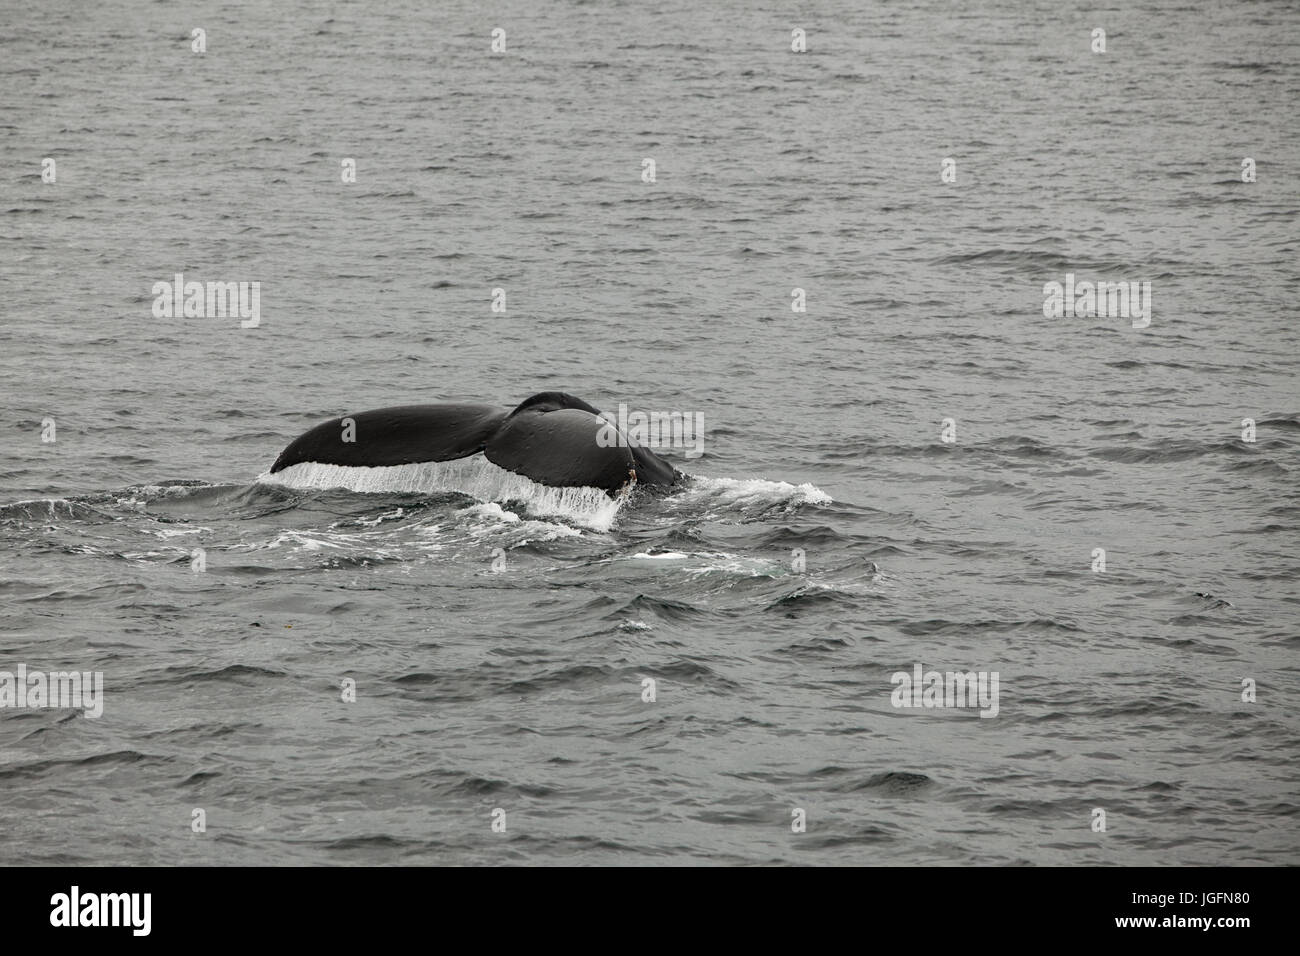 The tail fin of a humpback whale, Megaptera Novaeangliae, breaches the water. Stock Photo